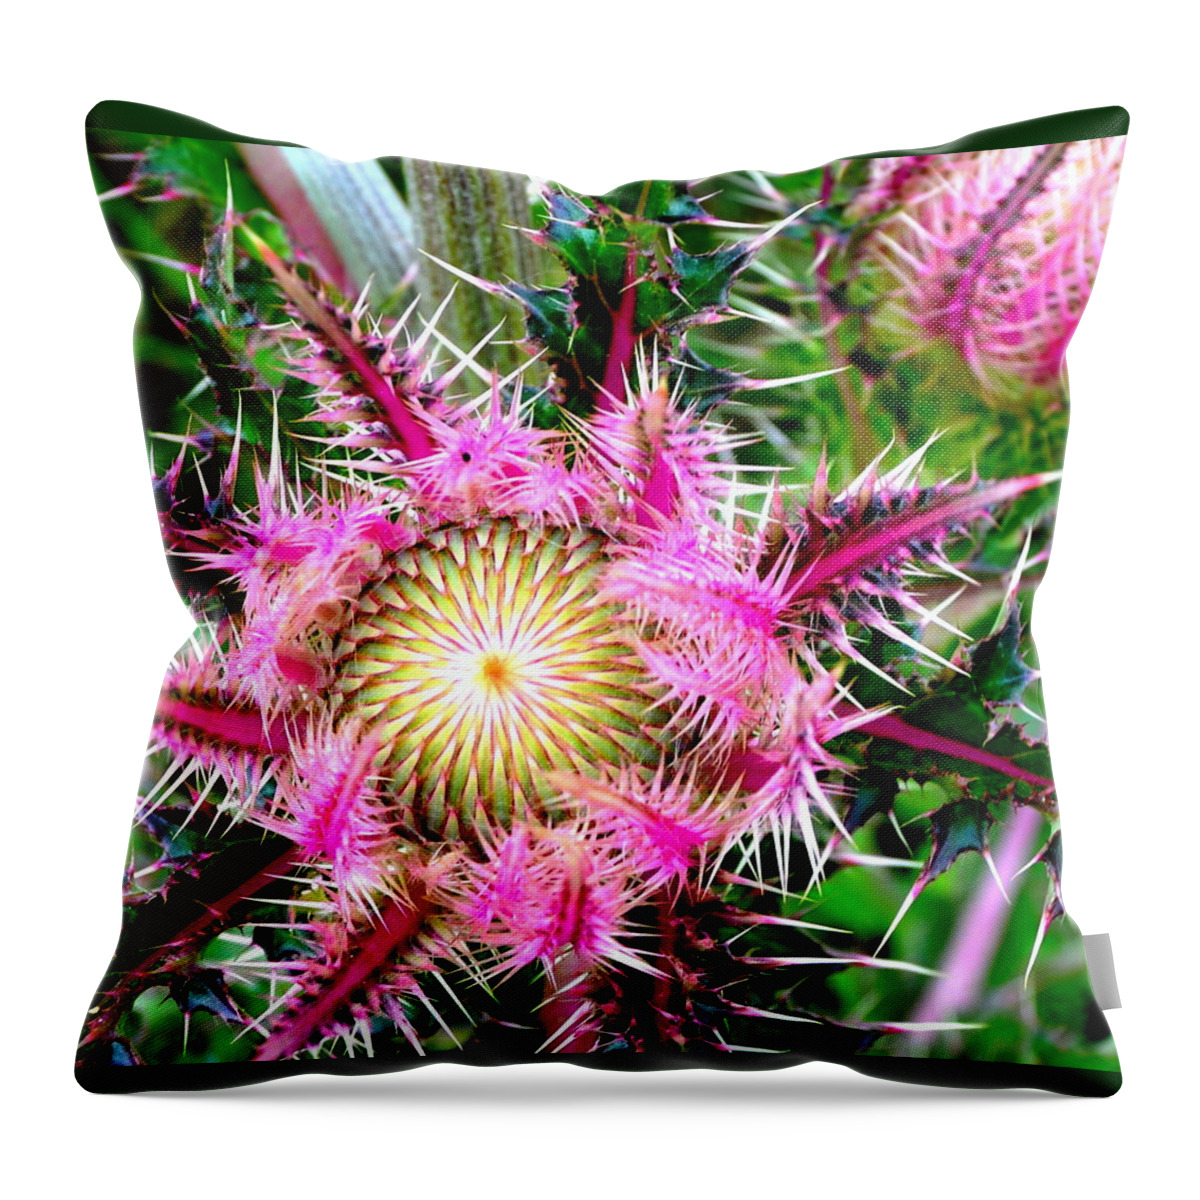 Thistle Throw Pillow featuring the photograph Texas Thistles by Antonia Citrino